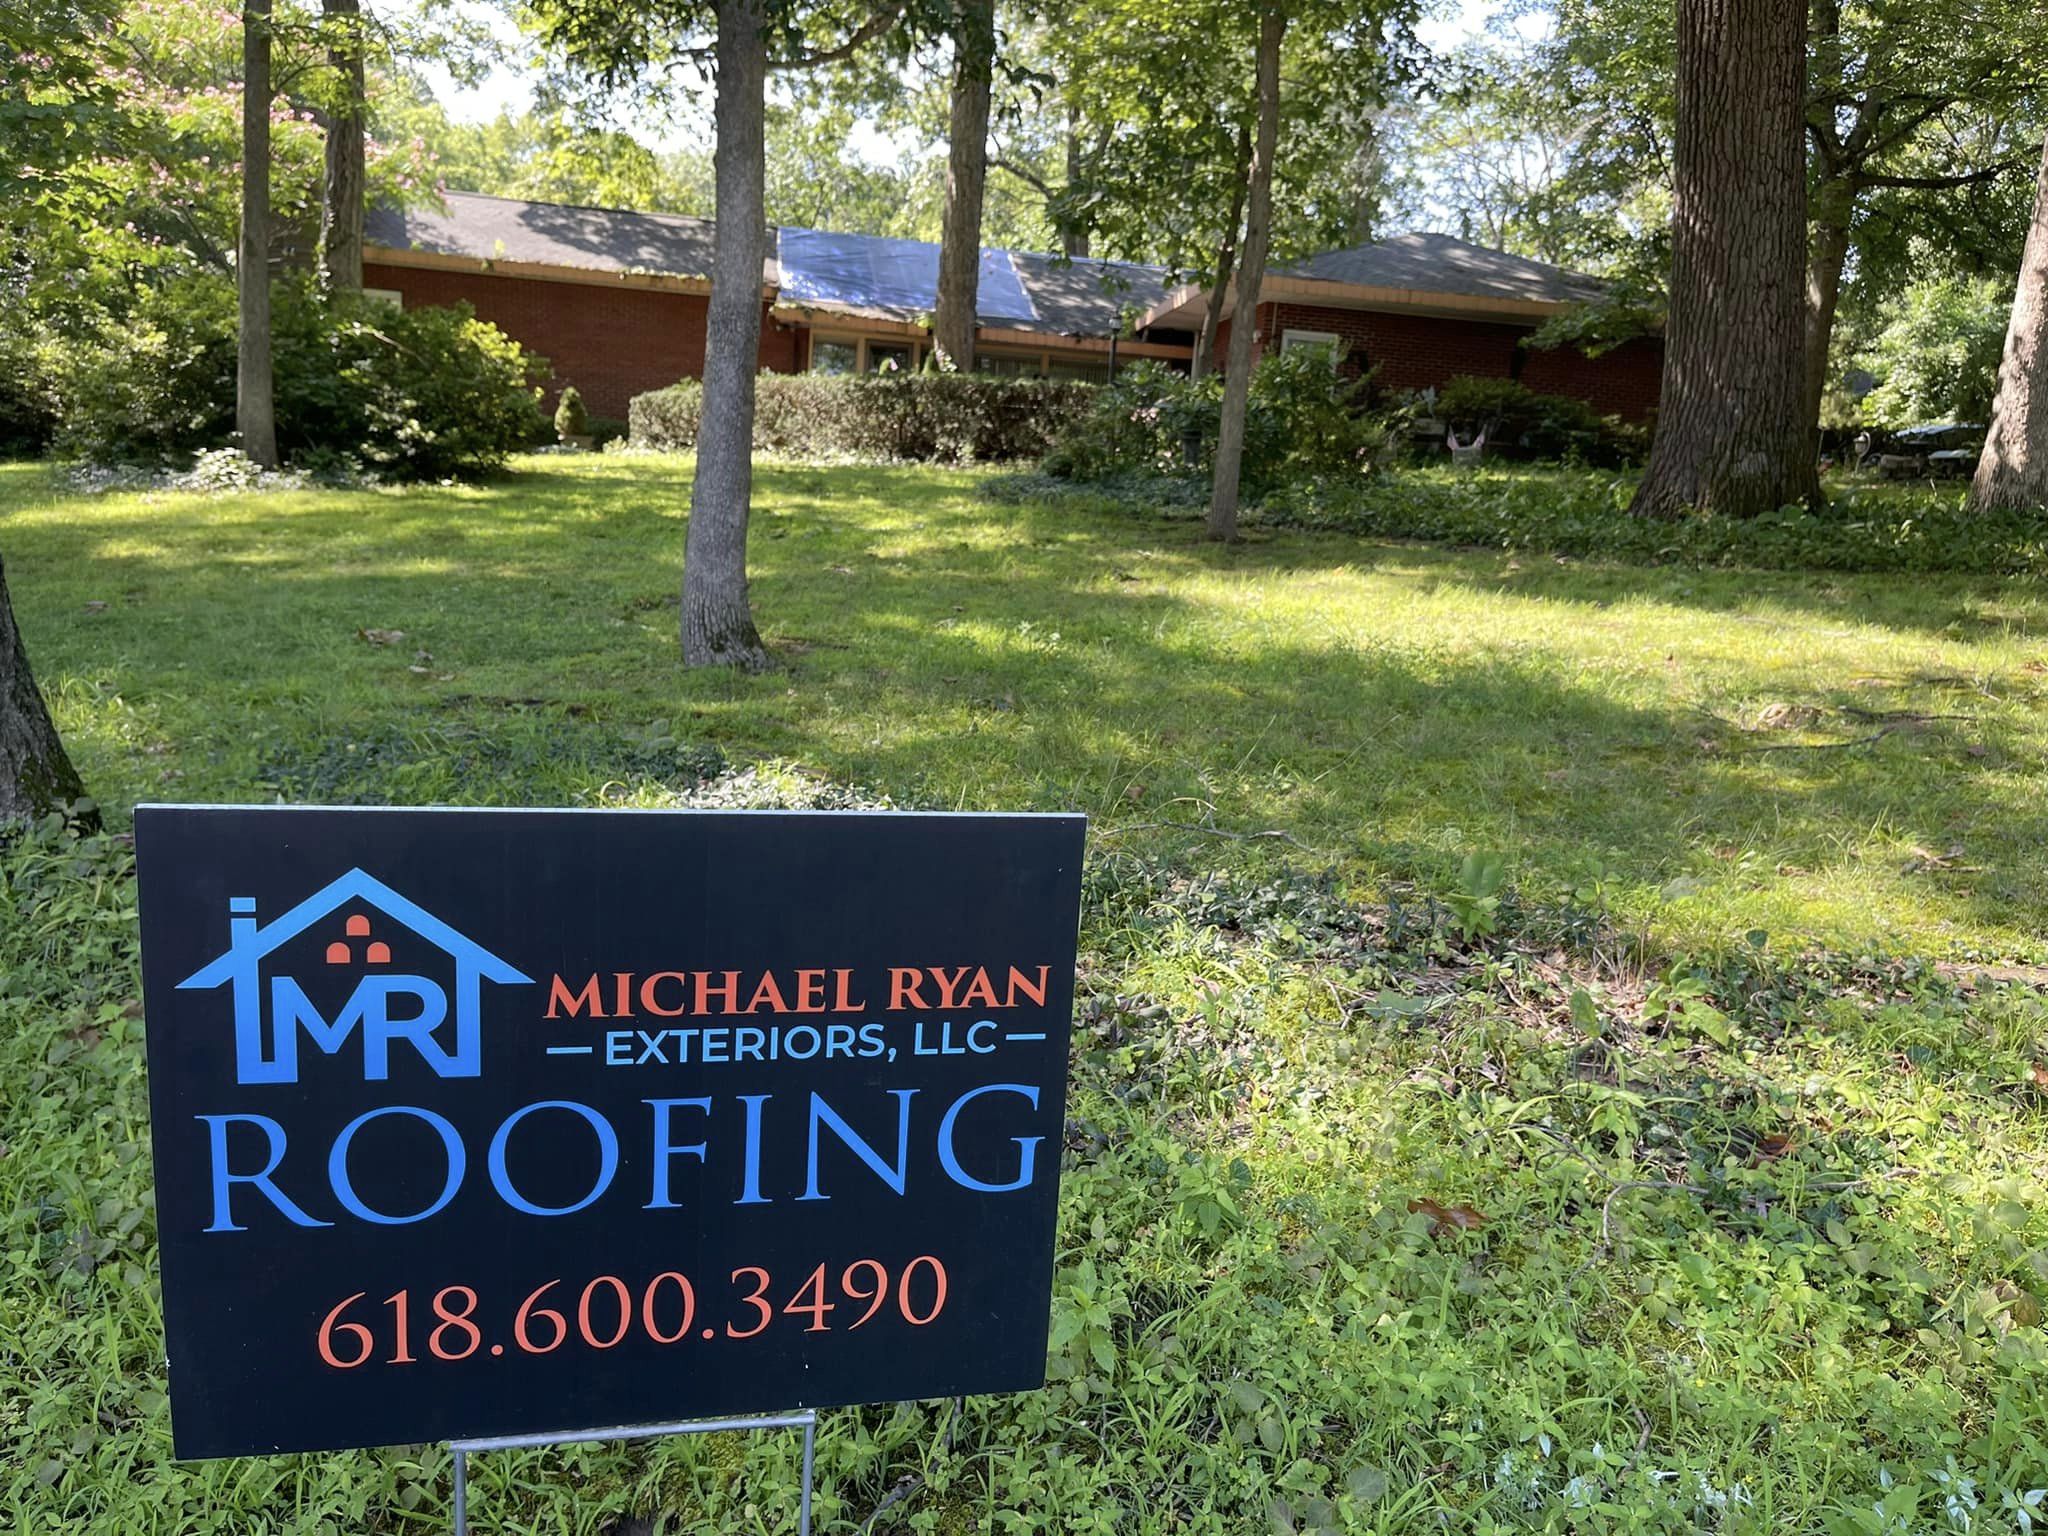 Roofing services in Edwardsville, Glen Carbon, and Troy, IL